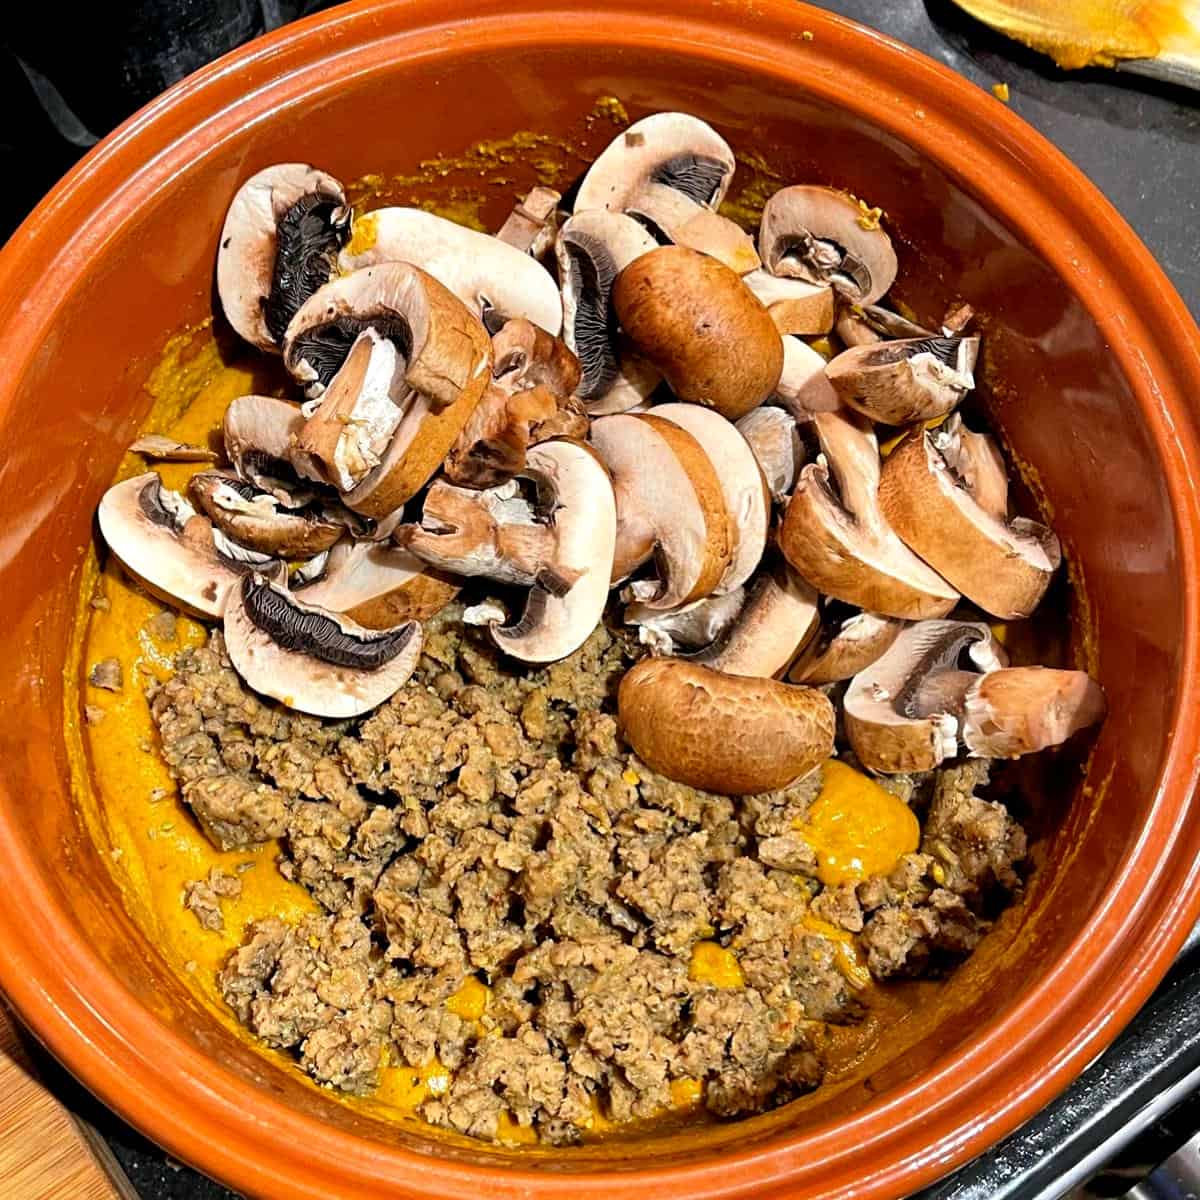 Mushrooms and seitan crumbles added to curry paste in pot.